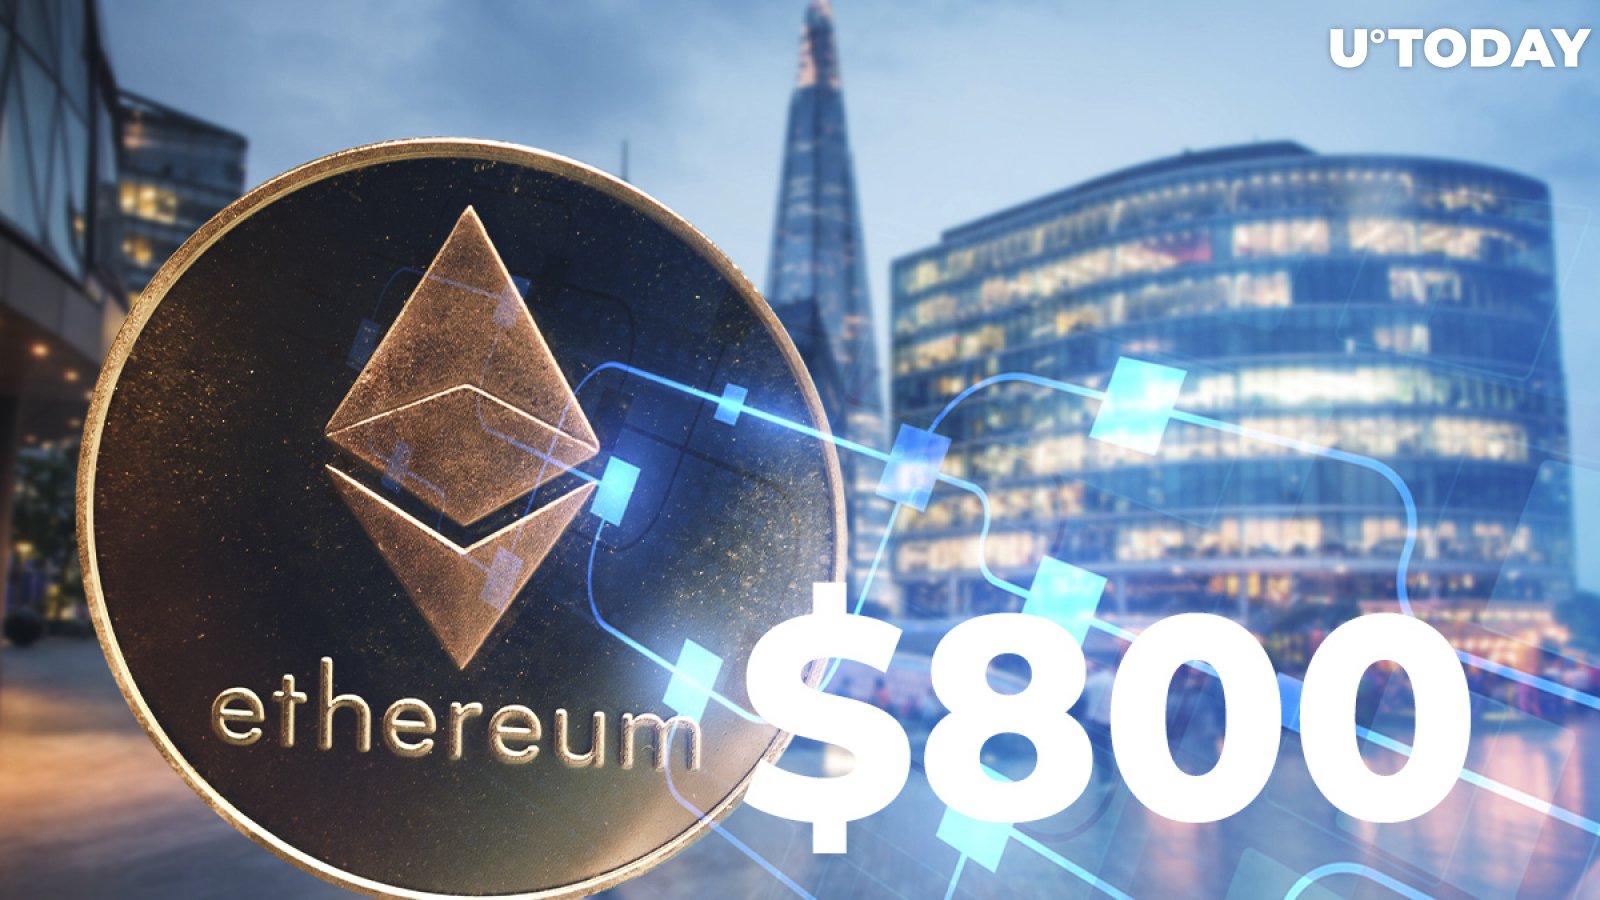 Ethereum Surpasses $800, but It's Far from Its All-Time High 